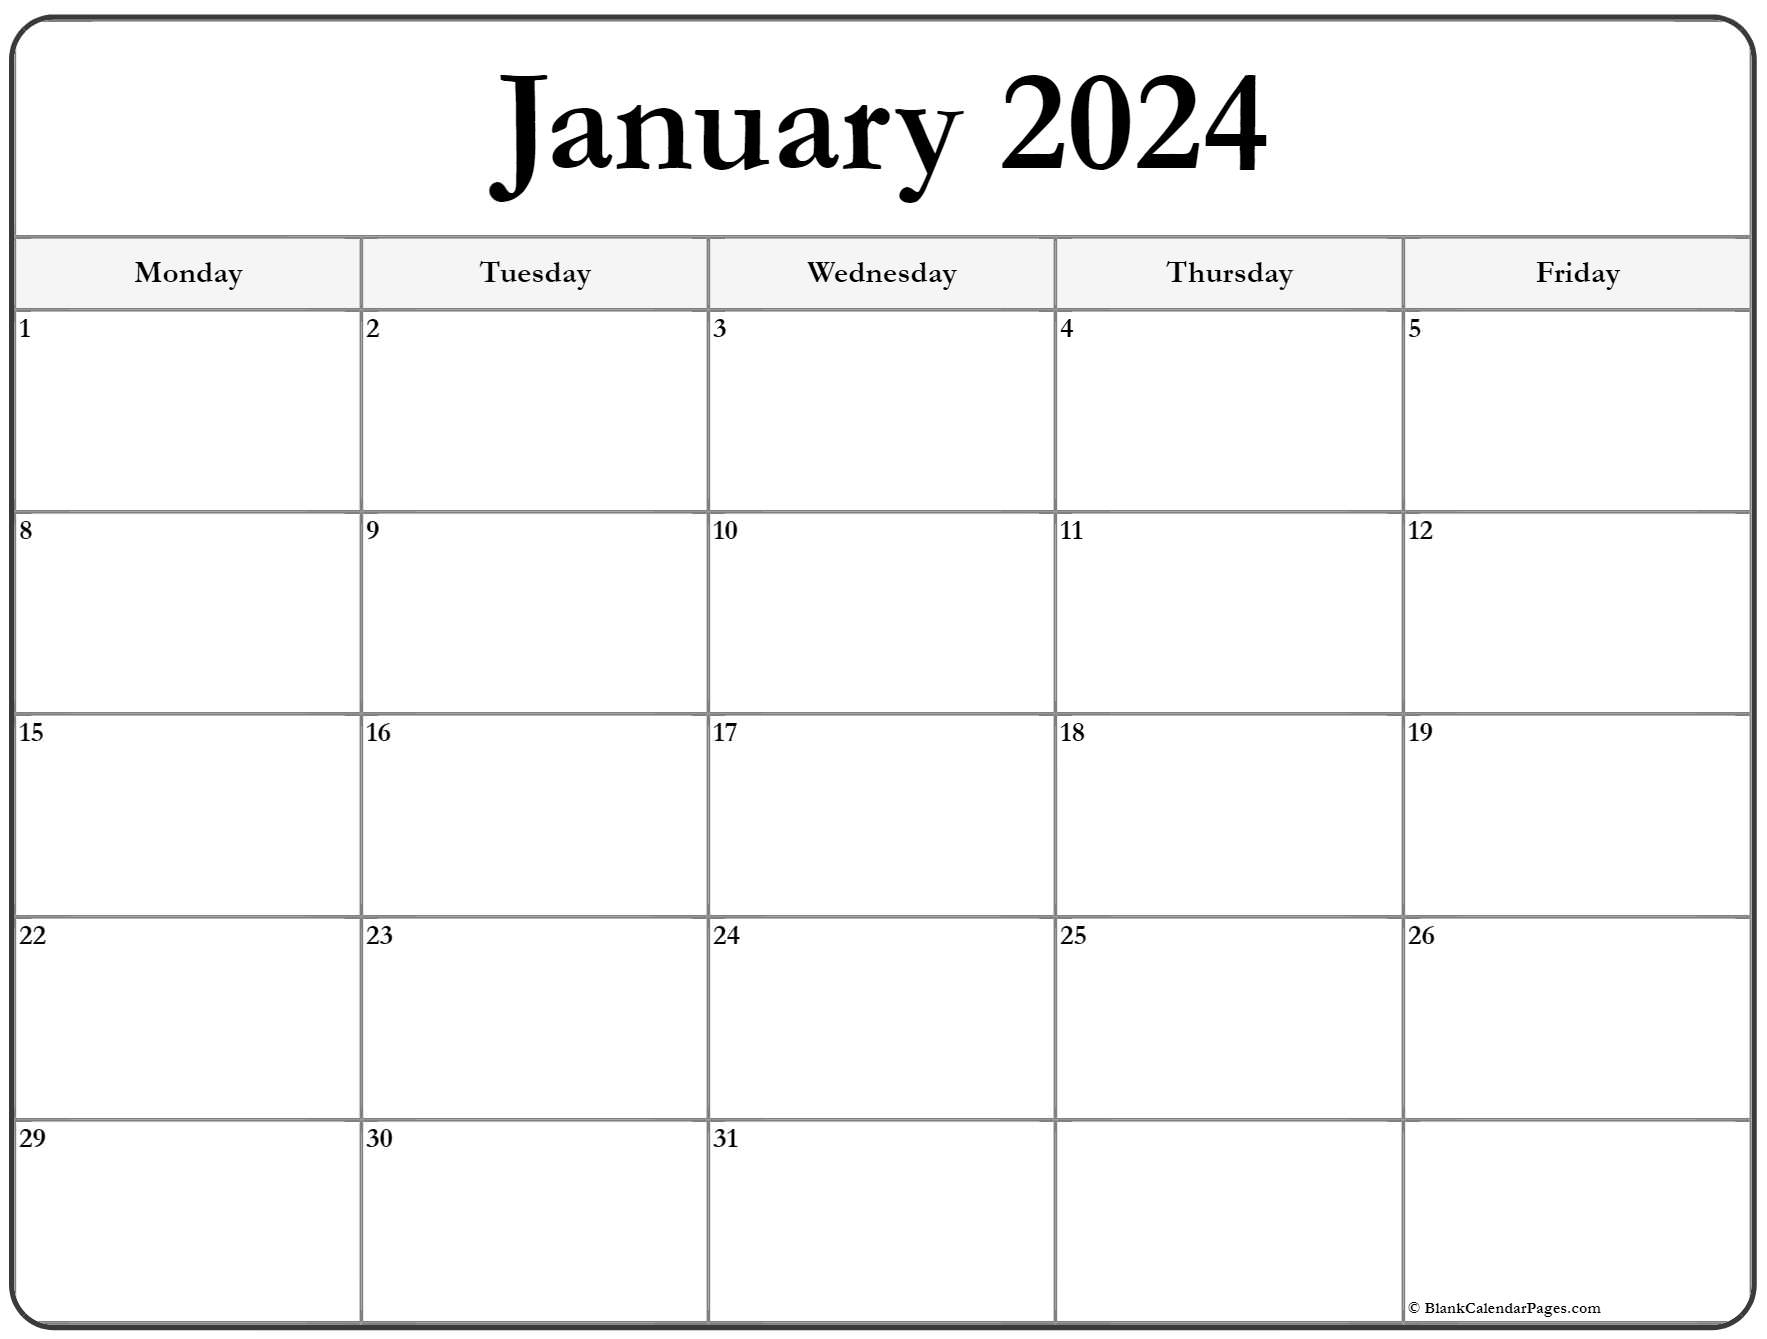 2024 Yearly Calendar Templates With Monday Start Free Printable 2024 - Free Printable 2024 Calendar Starting Monday